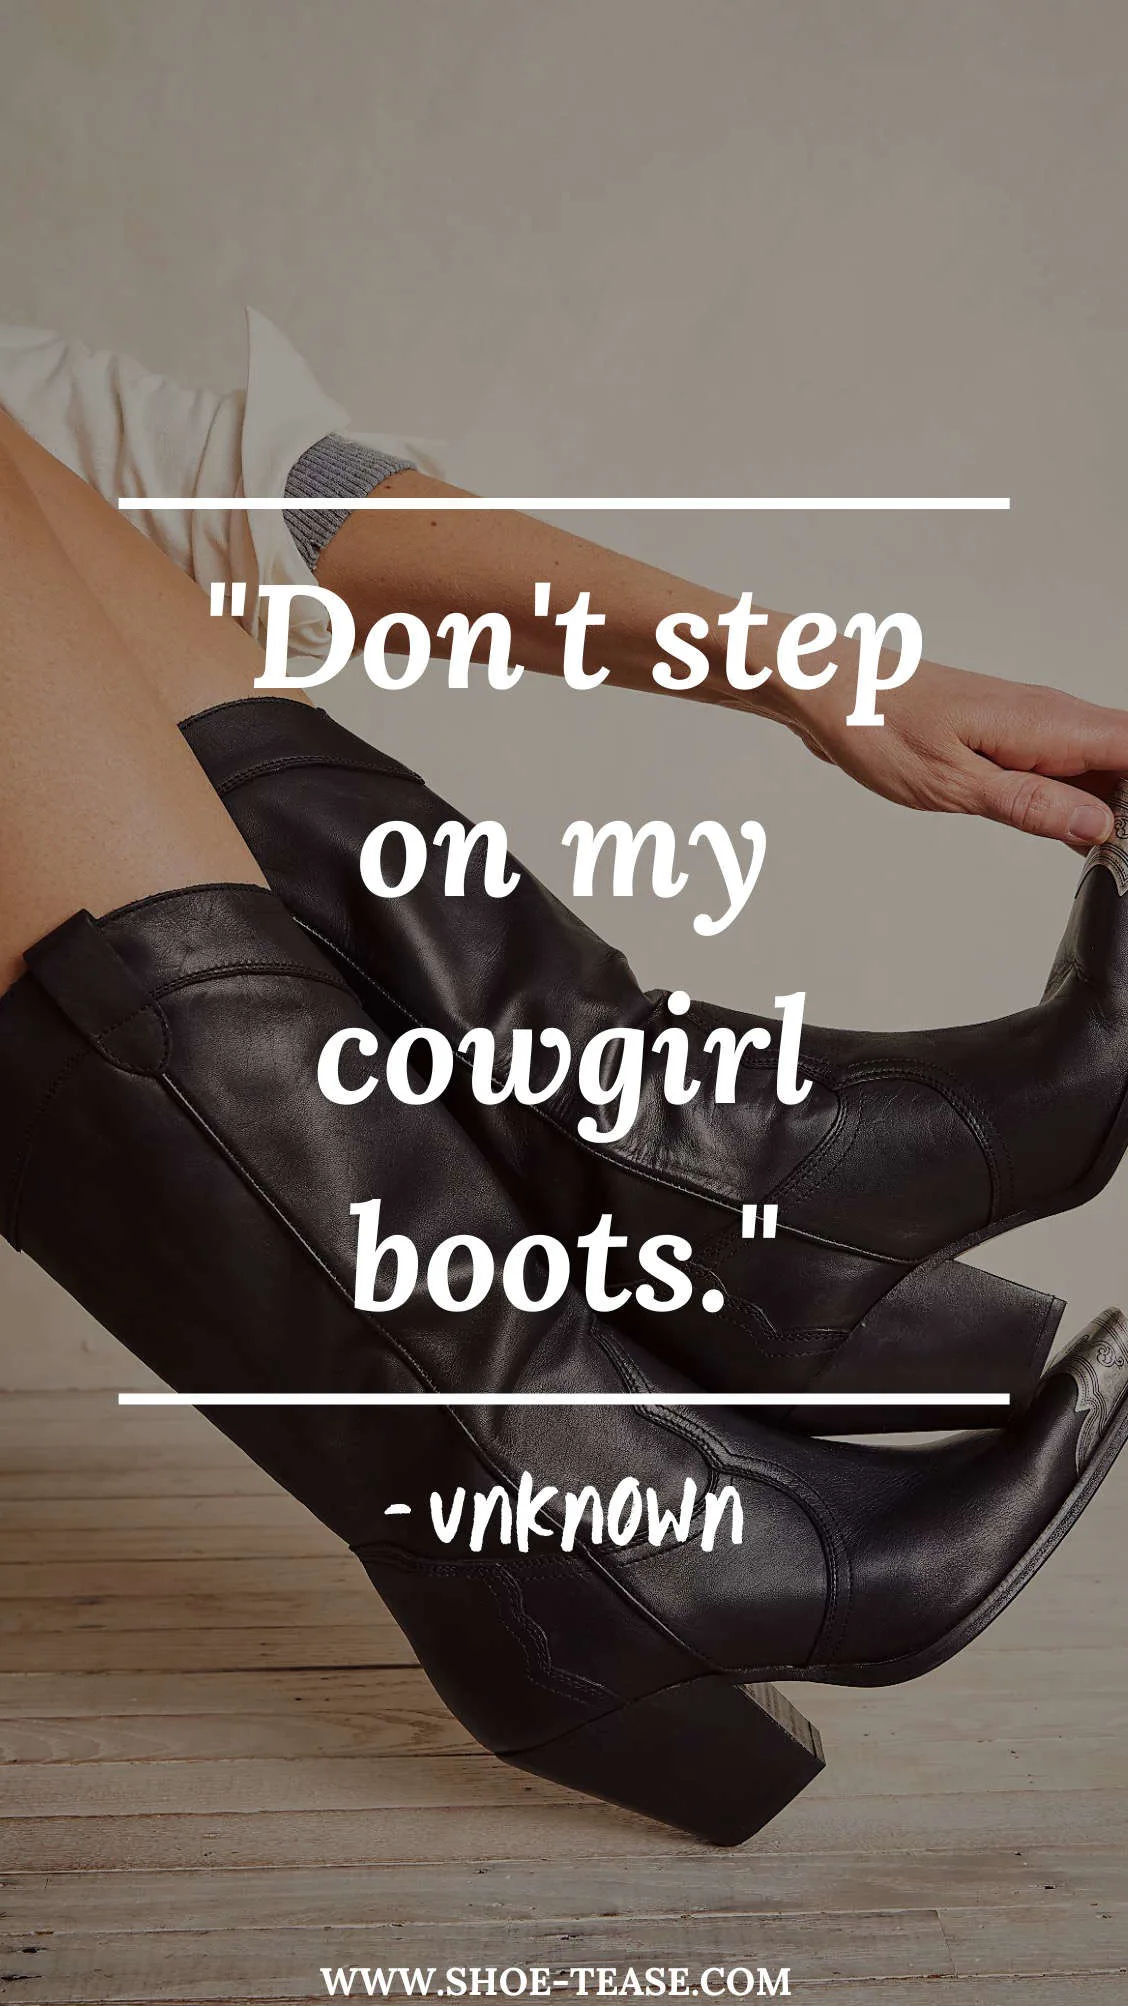 Quote text reading Dont step on my Cowgirl cowboy boots quotes by unknown over woman's feet wearing black cowboy boots.